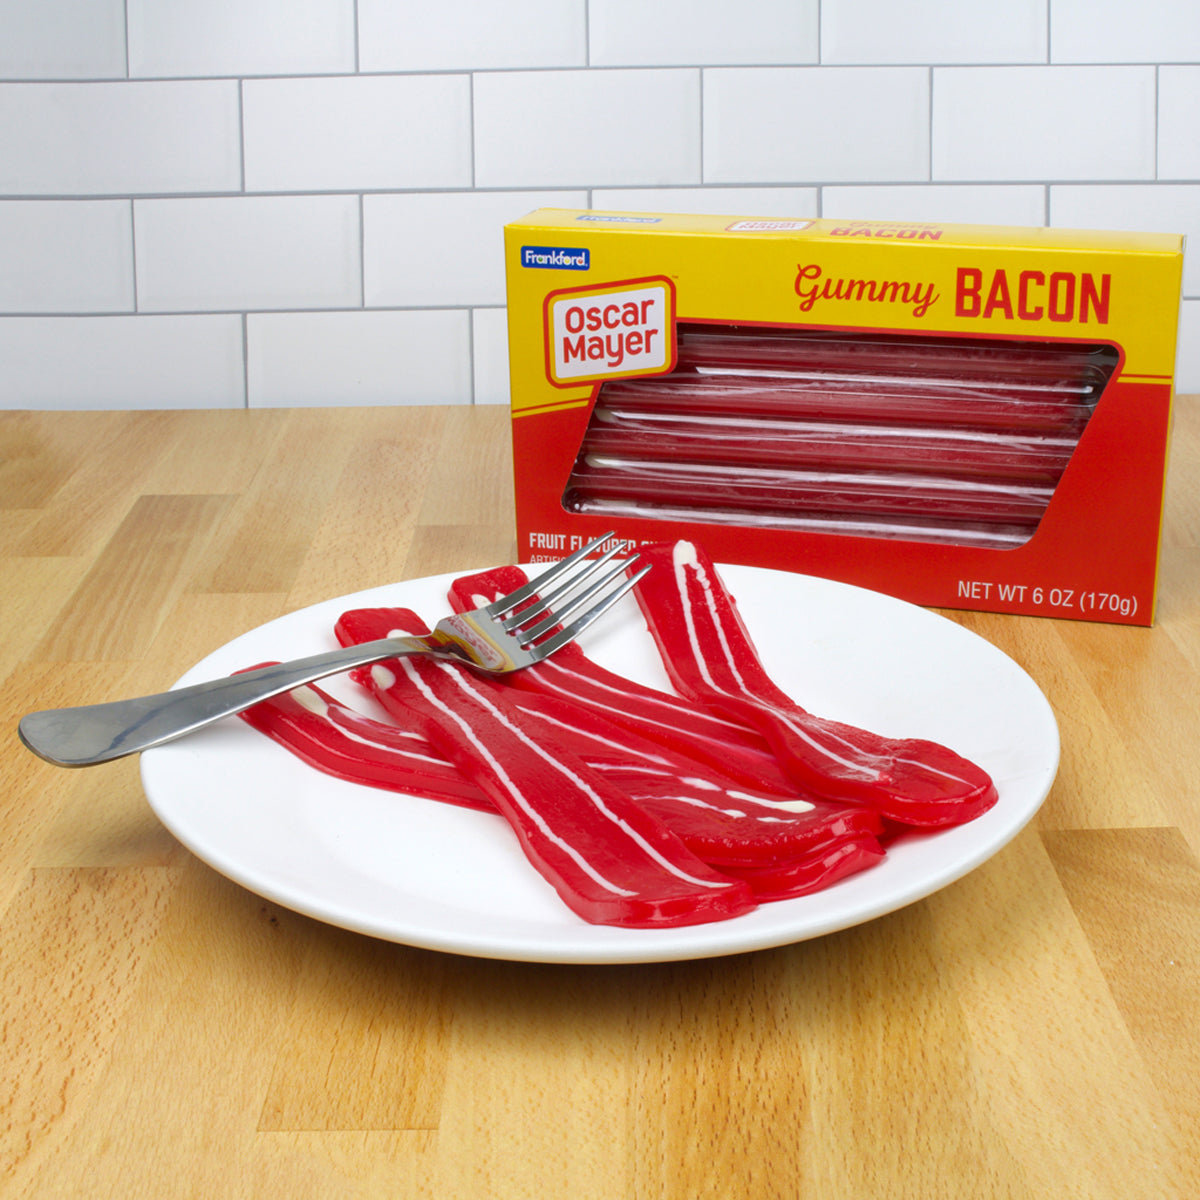 yellow and red box with plate of gummy bacon strips